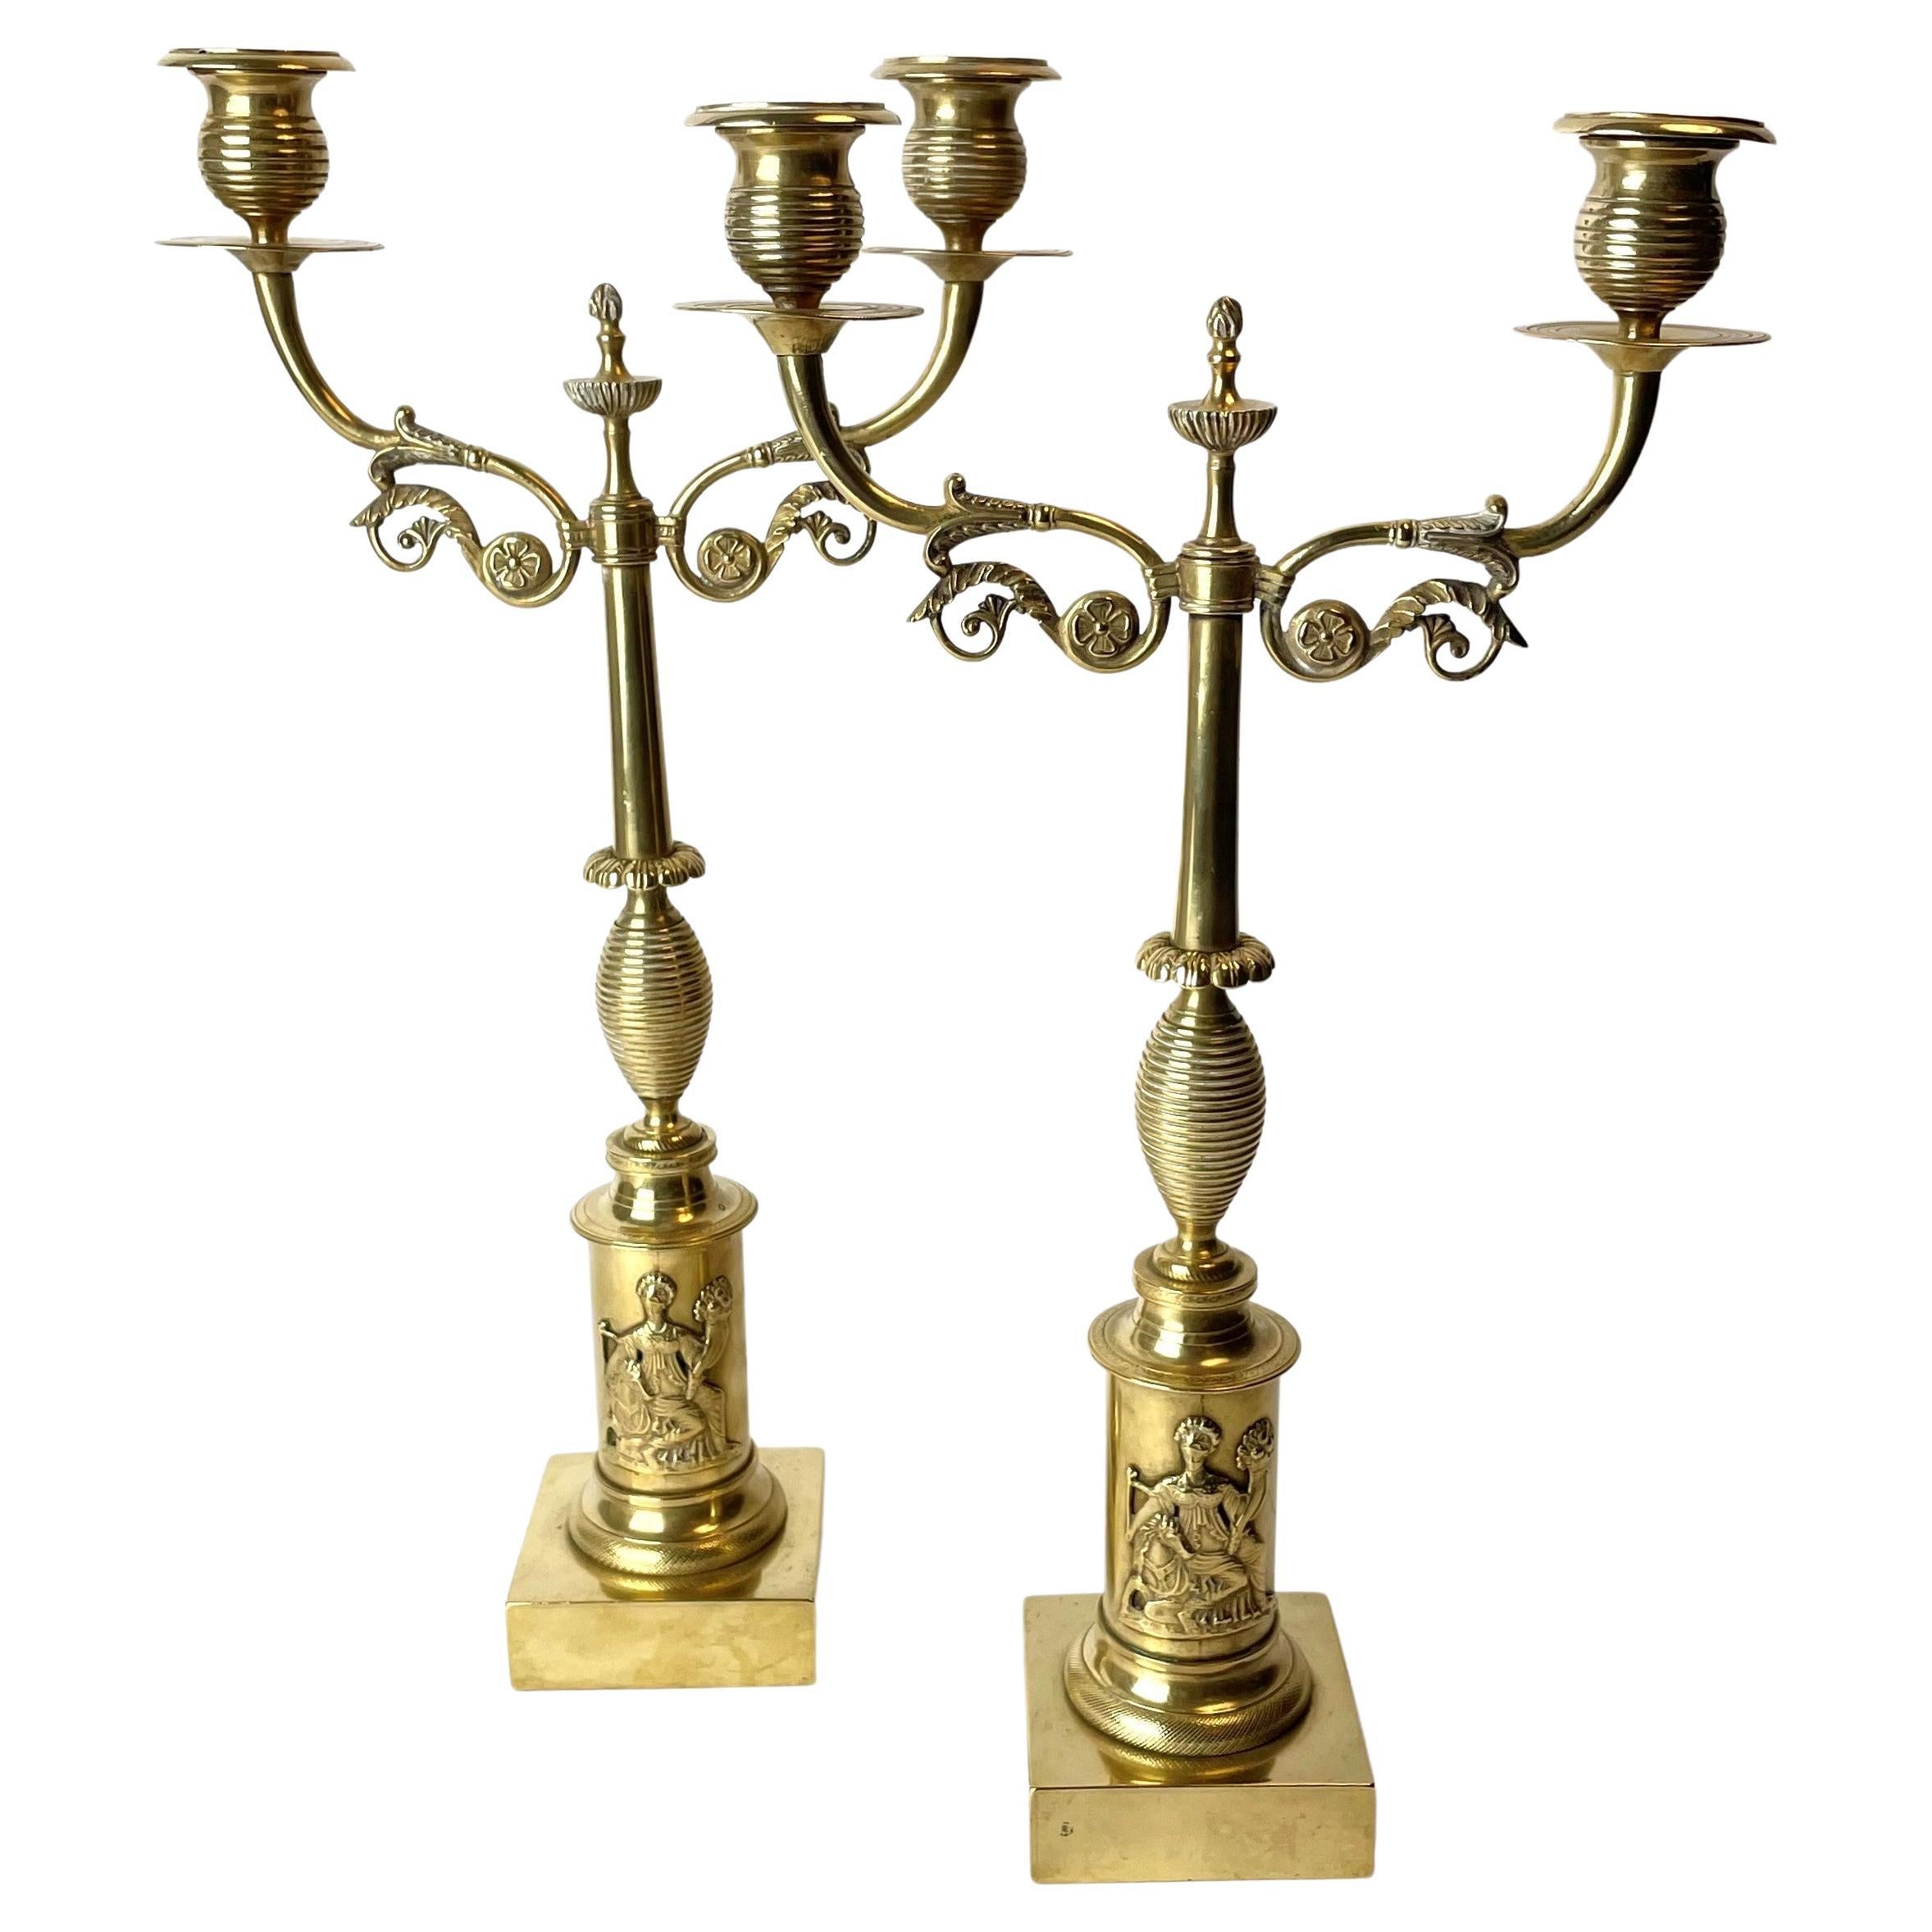 Elegant Pair of Candelabras in Swedish Empire 'Karl Johan' from the 1820s